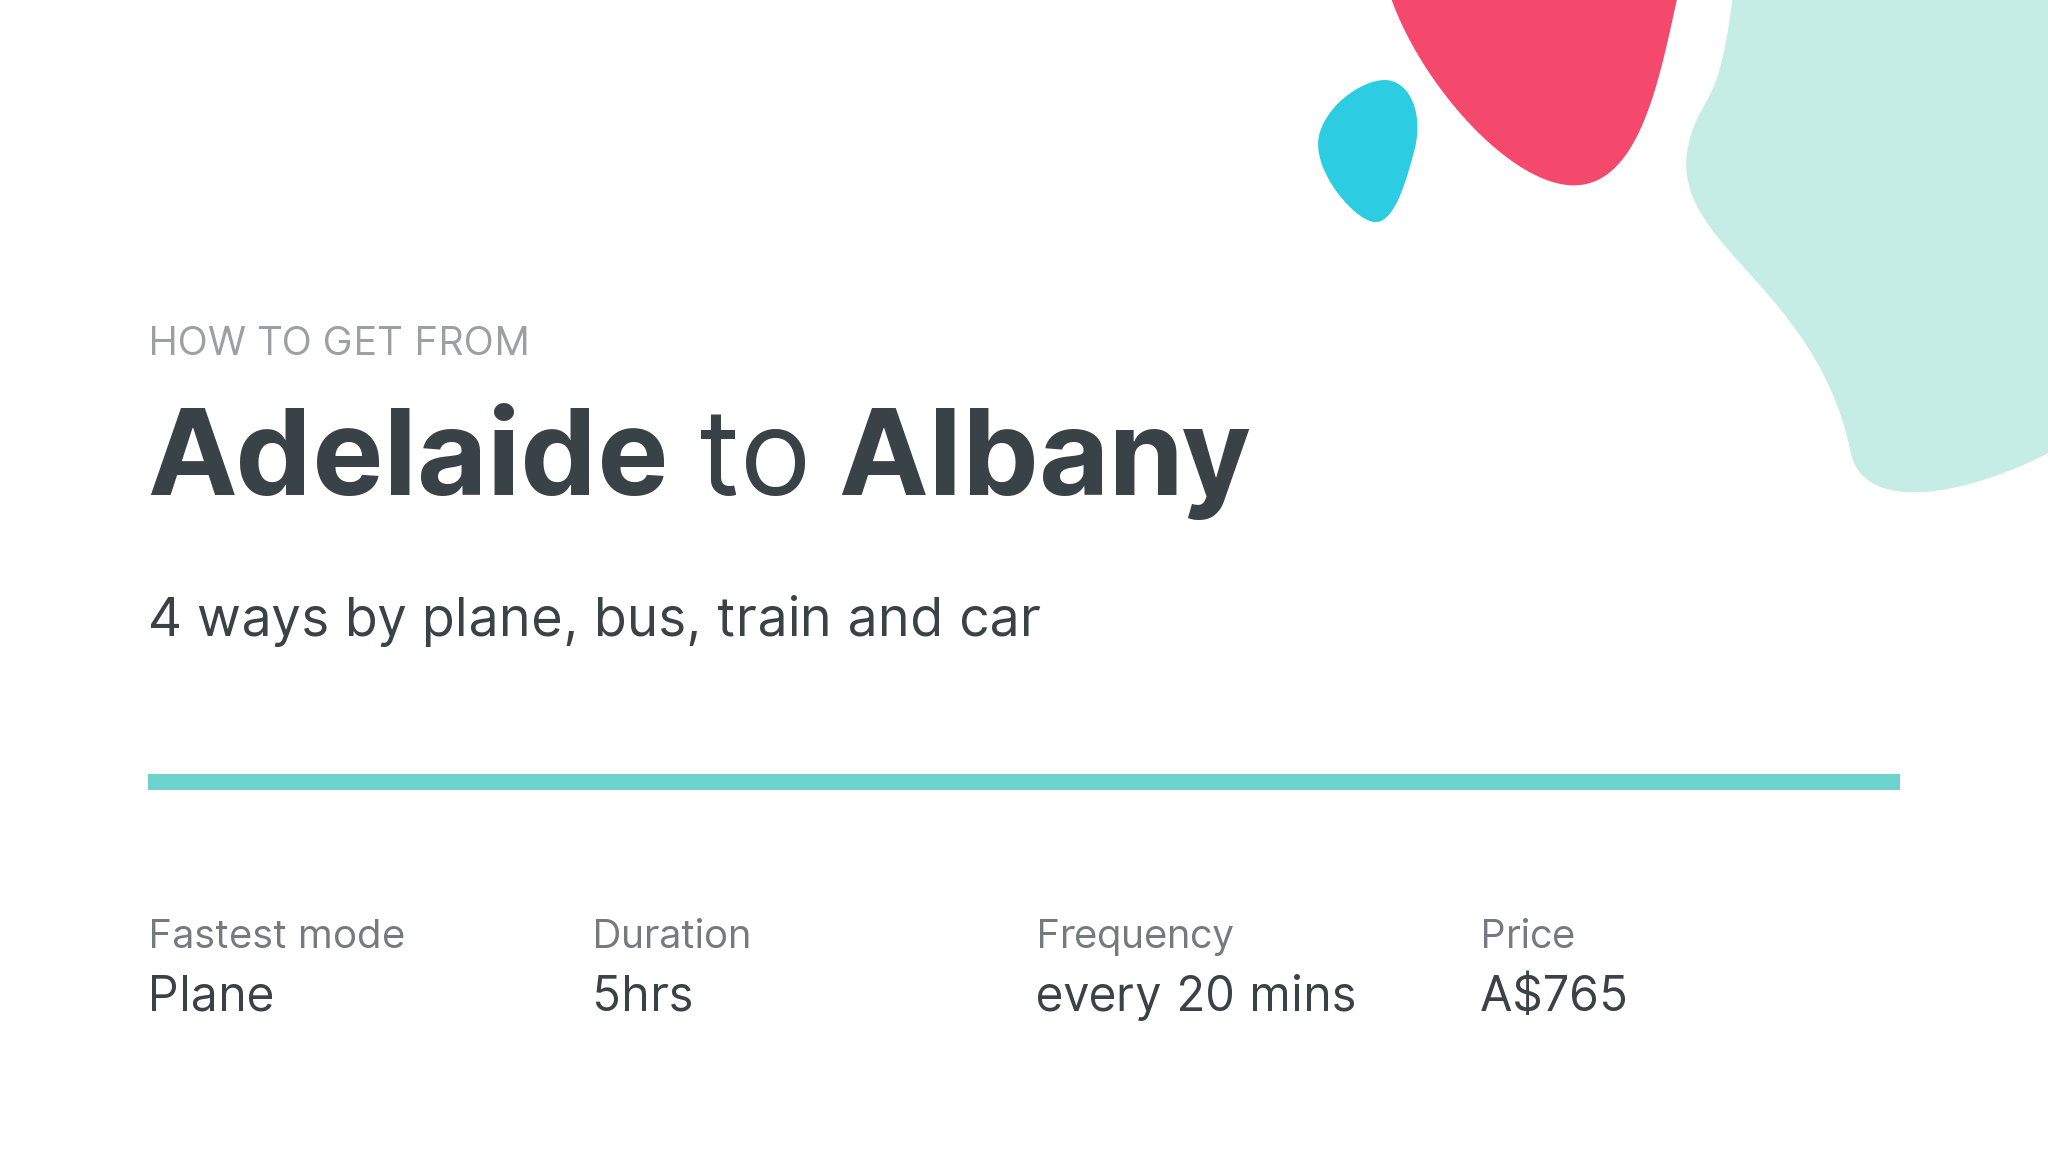 How do I get from Adelaide to Albany